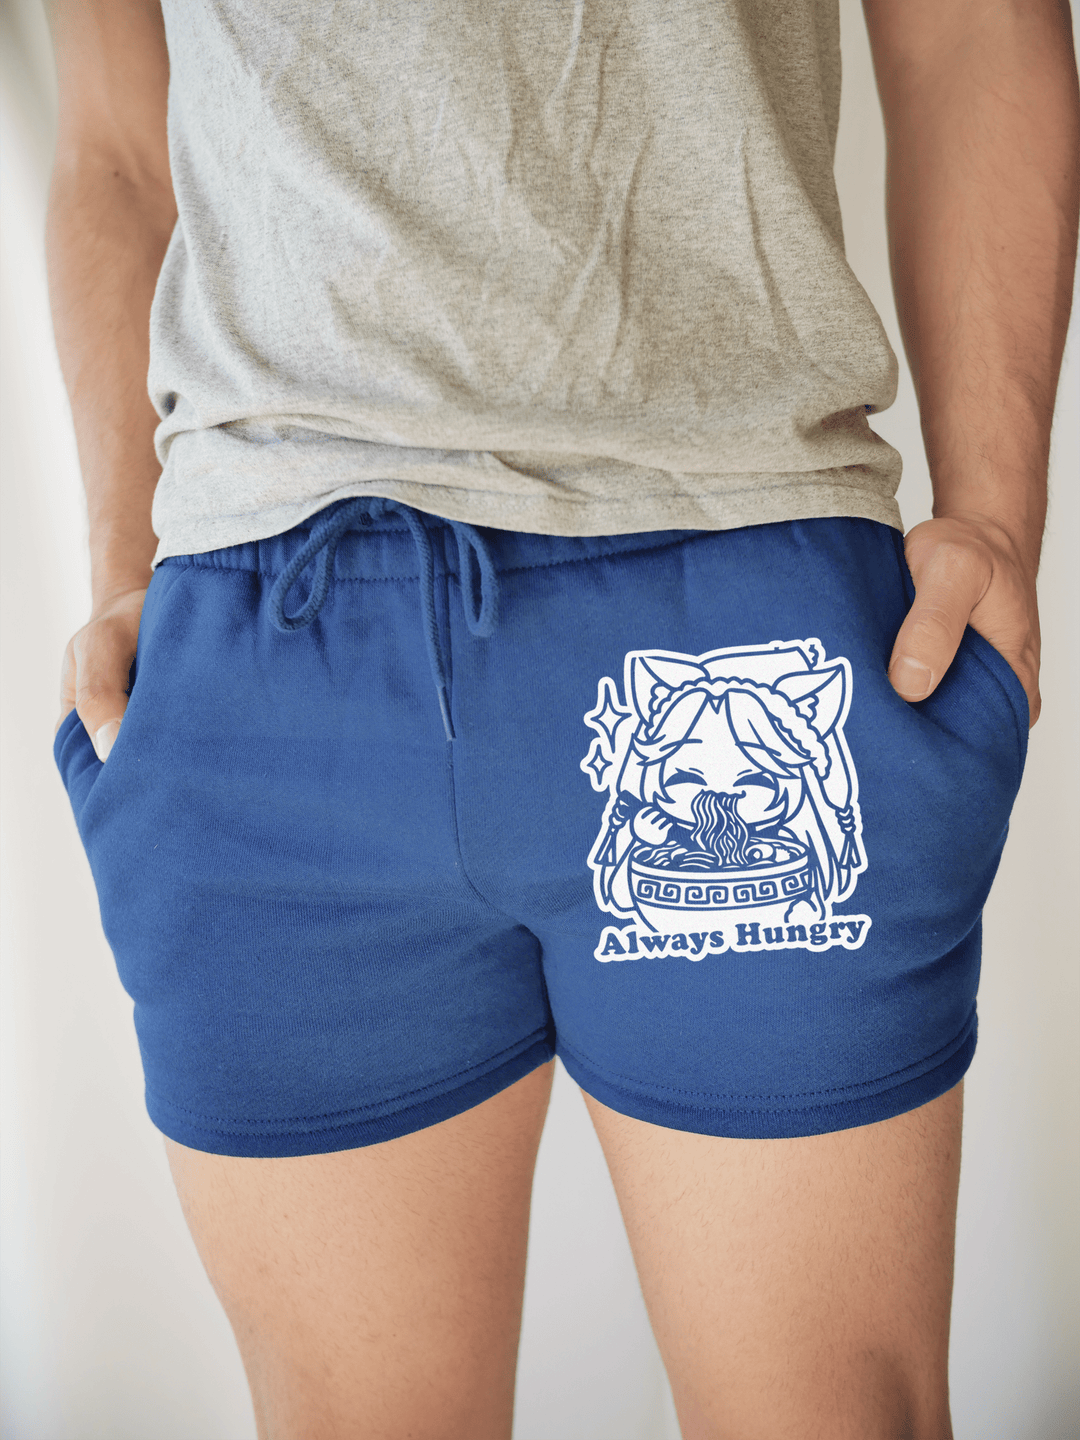 PixelThat Punderwear Shorts Royal Blue / S / Front Always Hungry Men's Gym Shorts